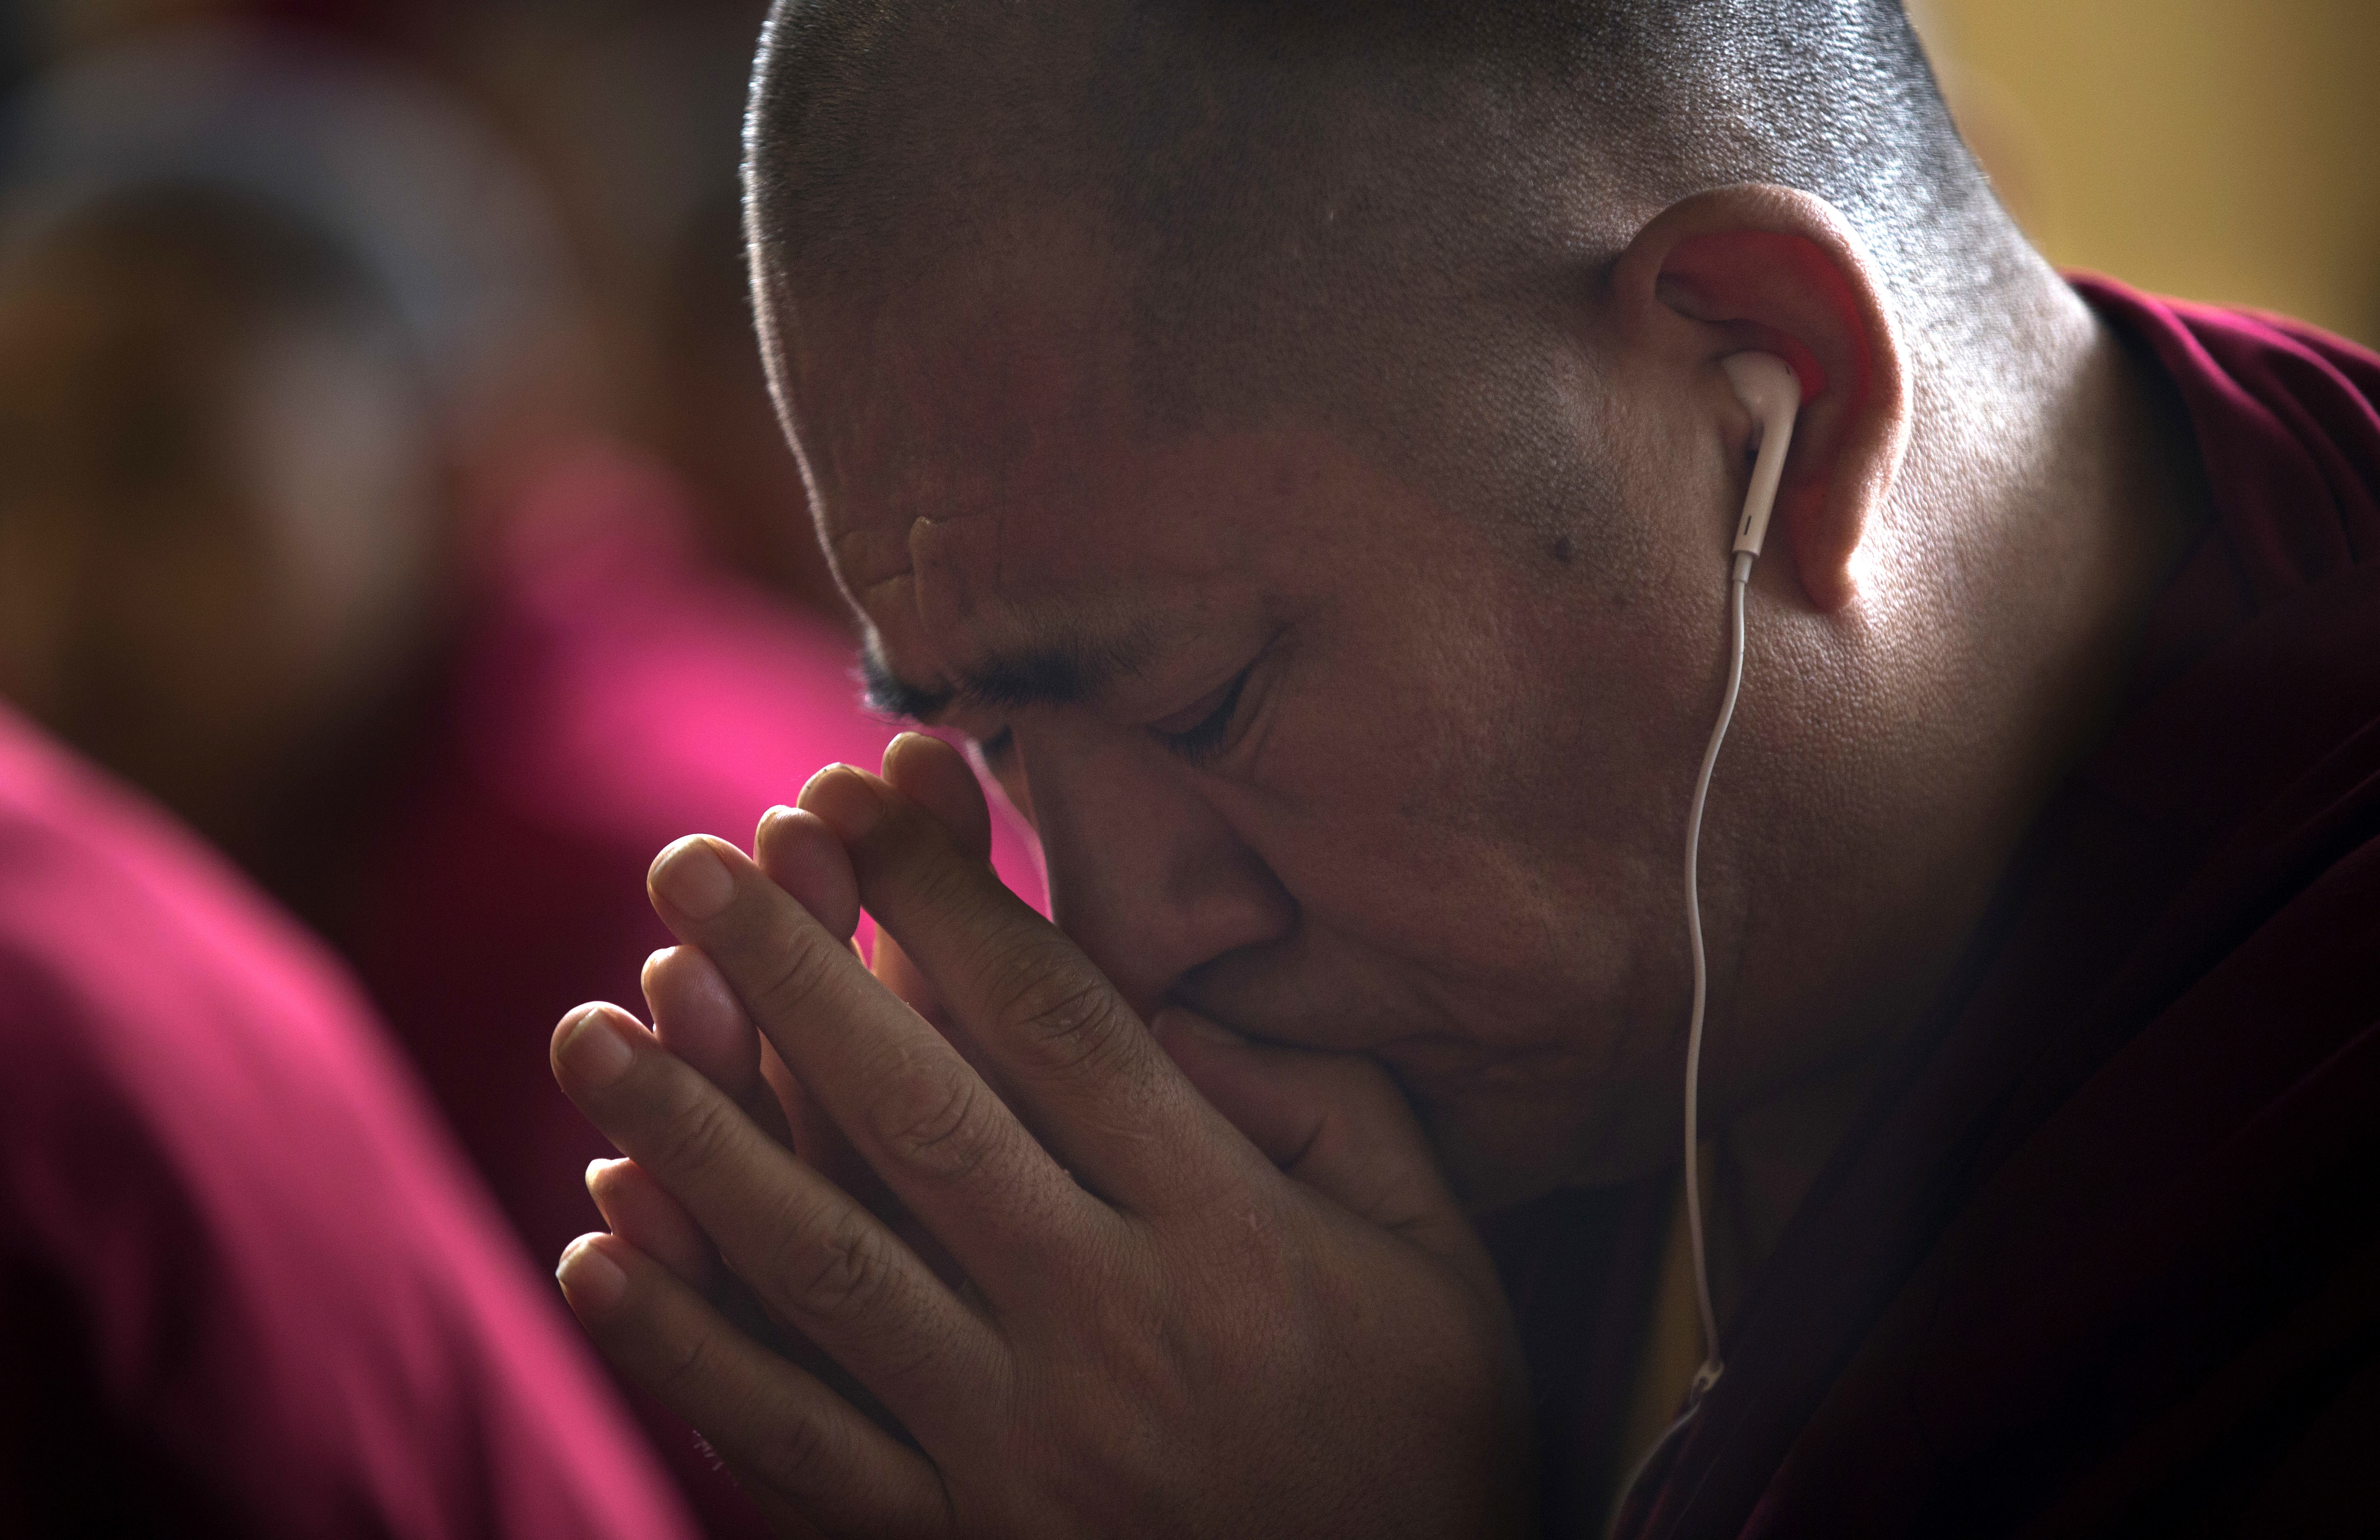 A Tibetan Buddhist monk prays as he listens to his spiritual leader the Dalai Lama during a religious talk at the Tsuglagkhang temple in Dharmsala, India, Wednesday, June 7, 2017. Each year the Tibetan leader talks to young Tibetans on Buddhist philosophy and selected texts. The three-day talk ended Wednesday. (AP Photo/Ashwini Bhatia)